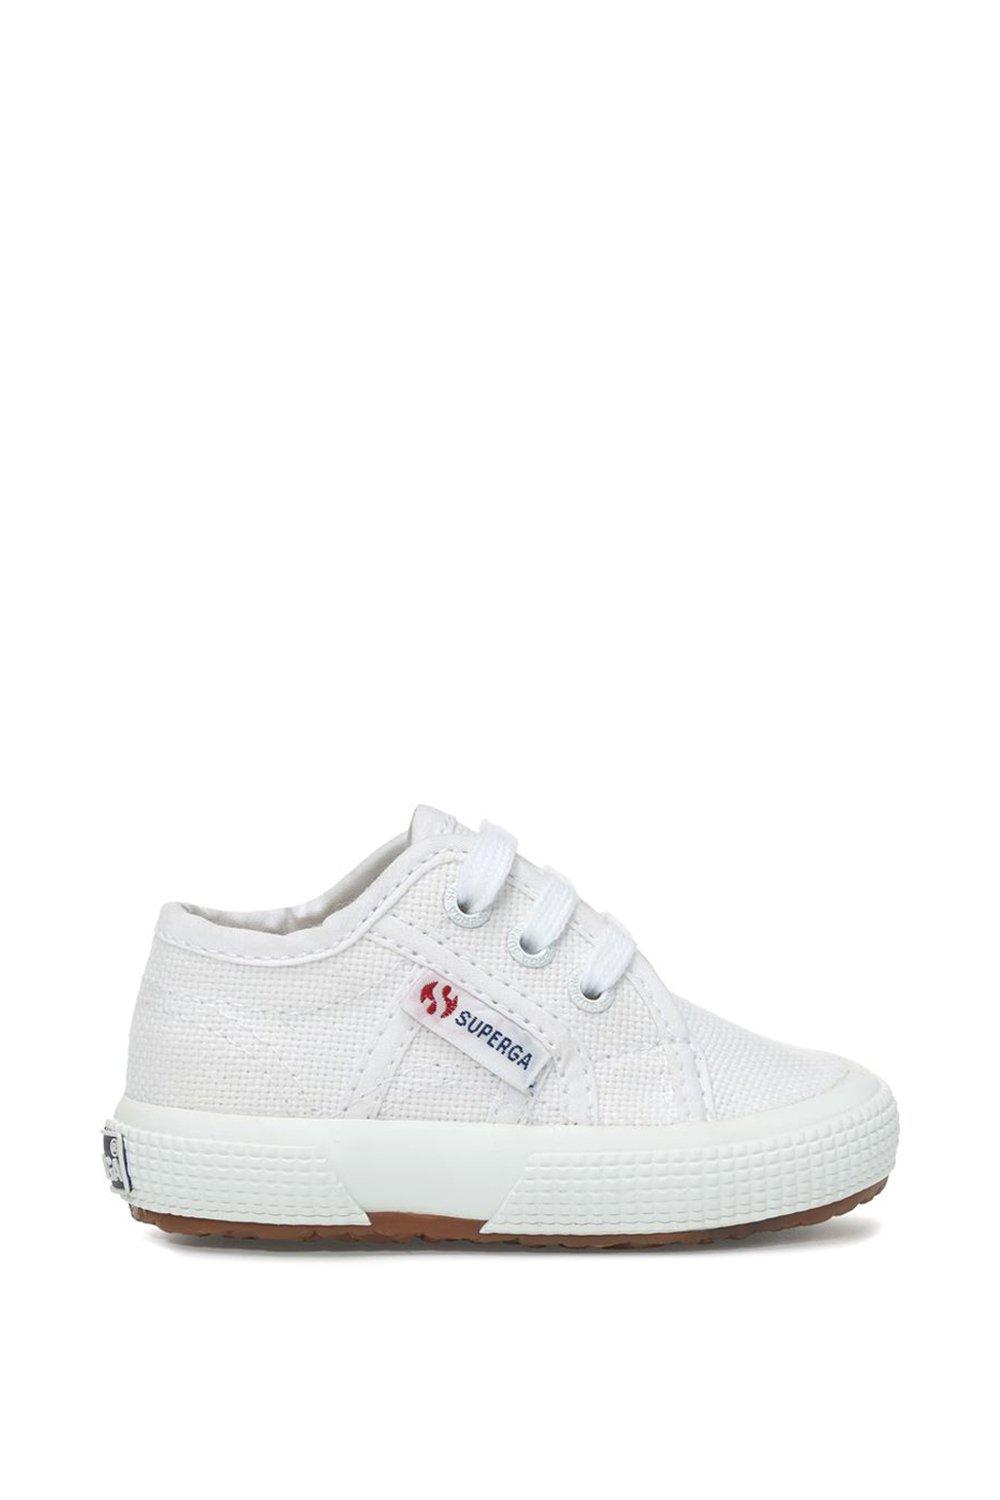 ’2750 Baby Cotu Classic’ Lace up Canvas Trainers